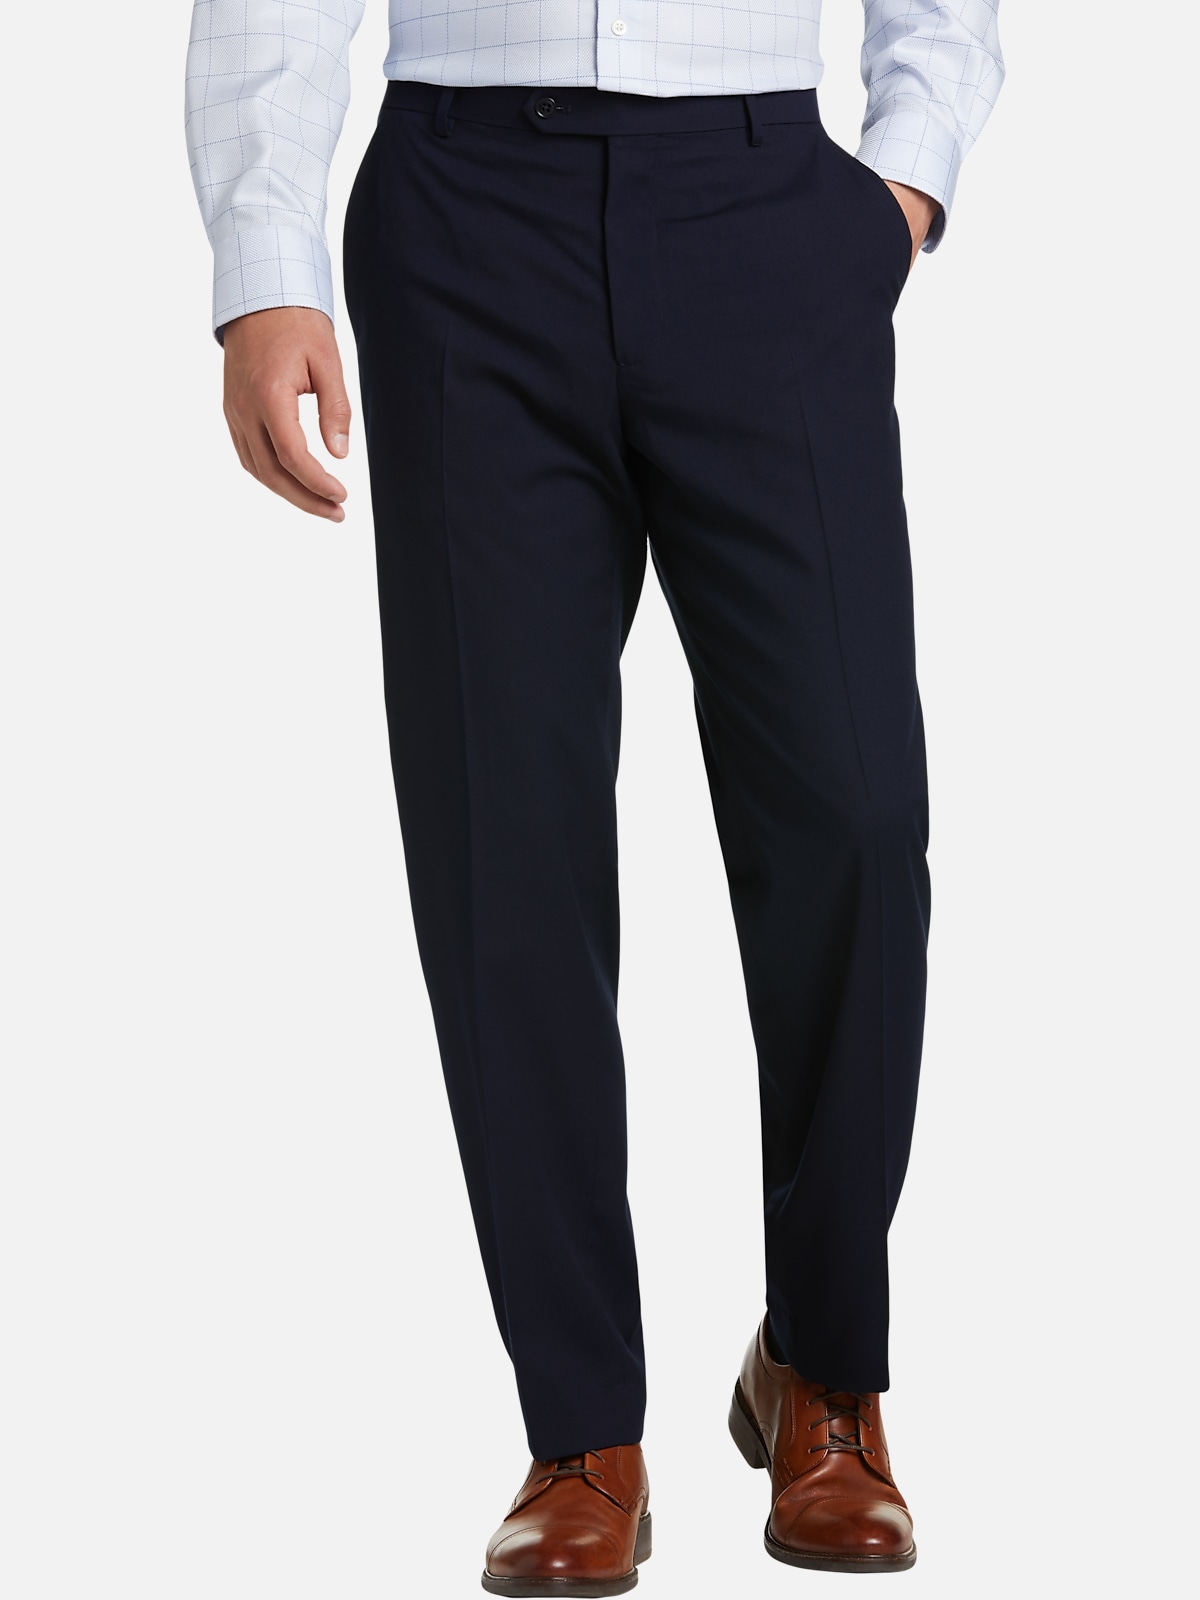 Pronto Uomo Modern Fit Suit Separates Pants | All Clearance| Men's ...